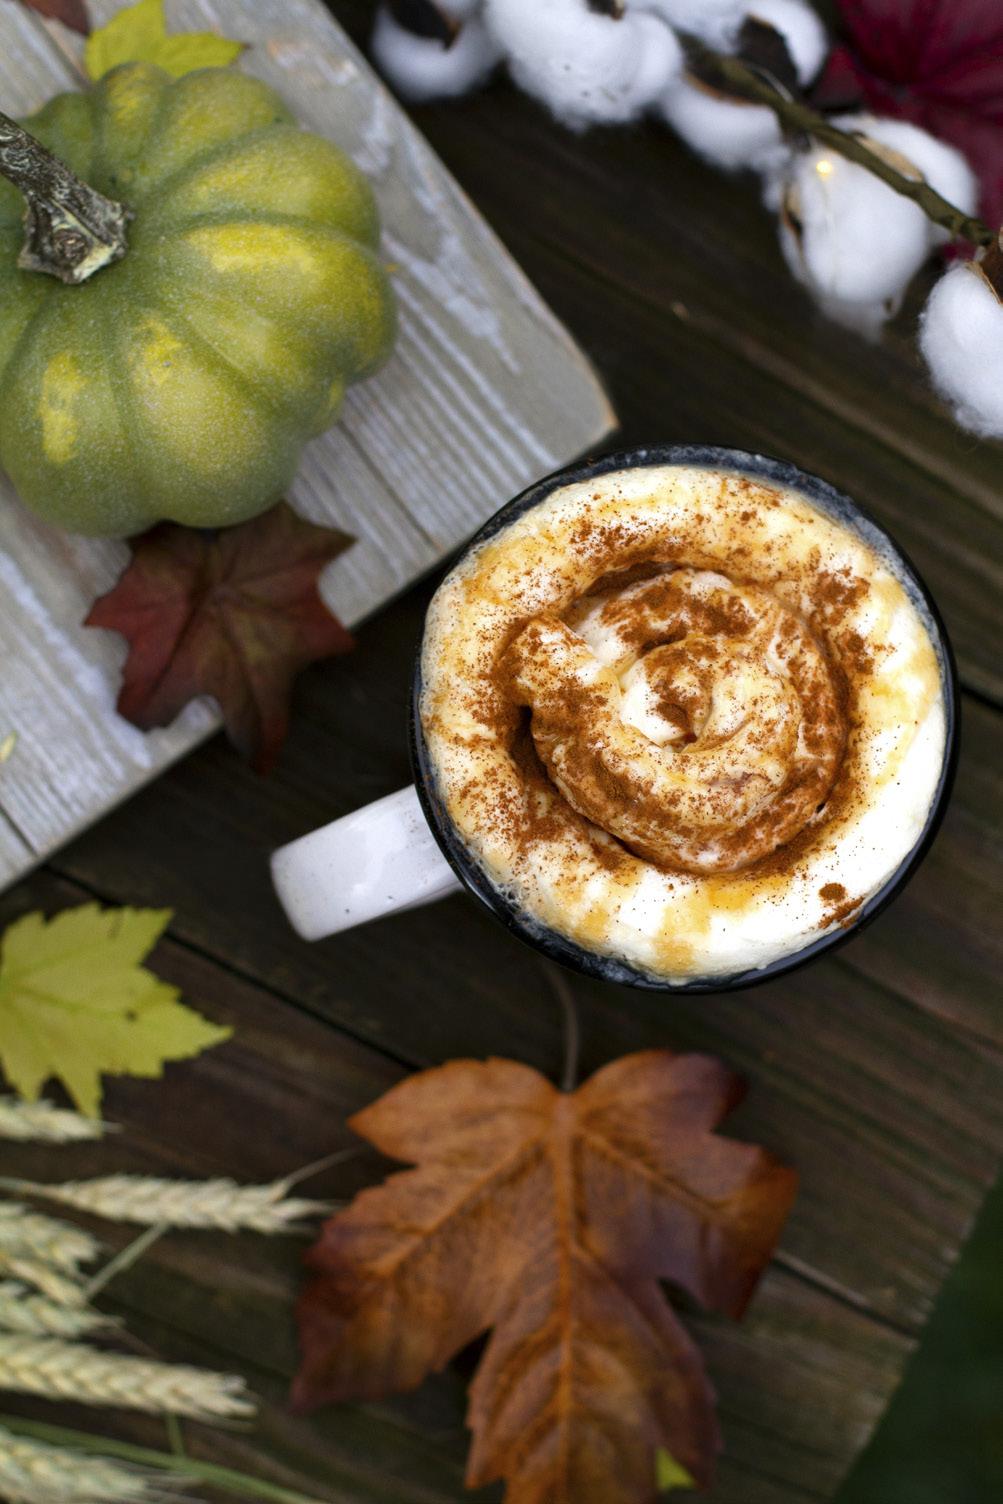 Apple Cider Doughnut Apple cider doughnuts have already started making an appearance this season so why not add espresso and whipped cream to make it the perfect fall latte?! 1 oz.